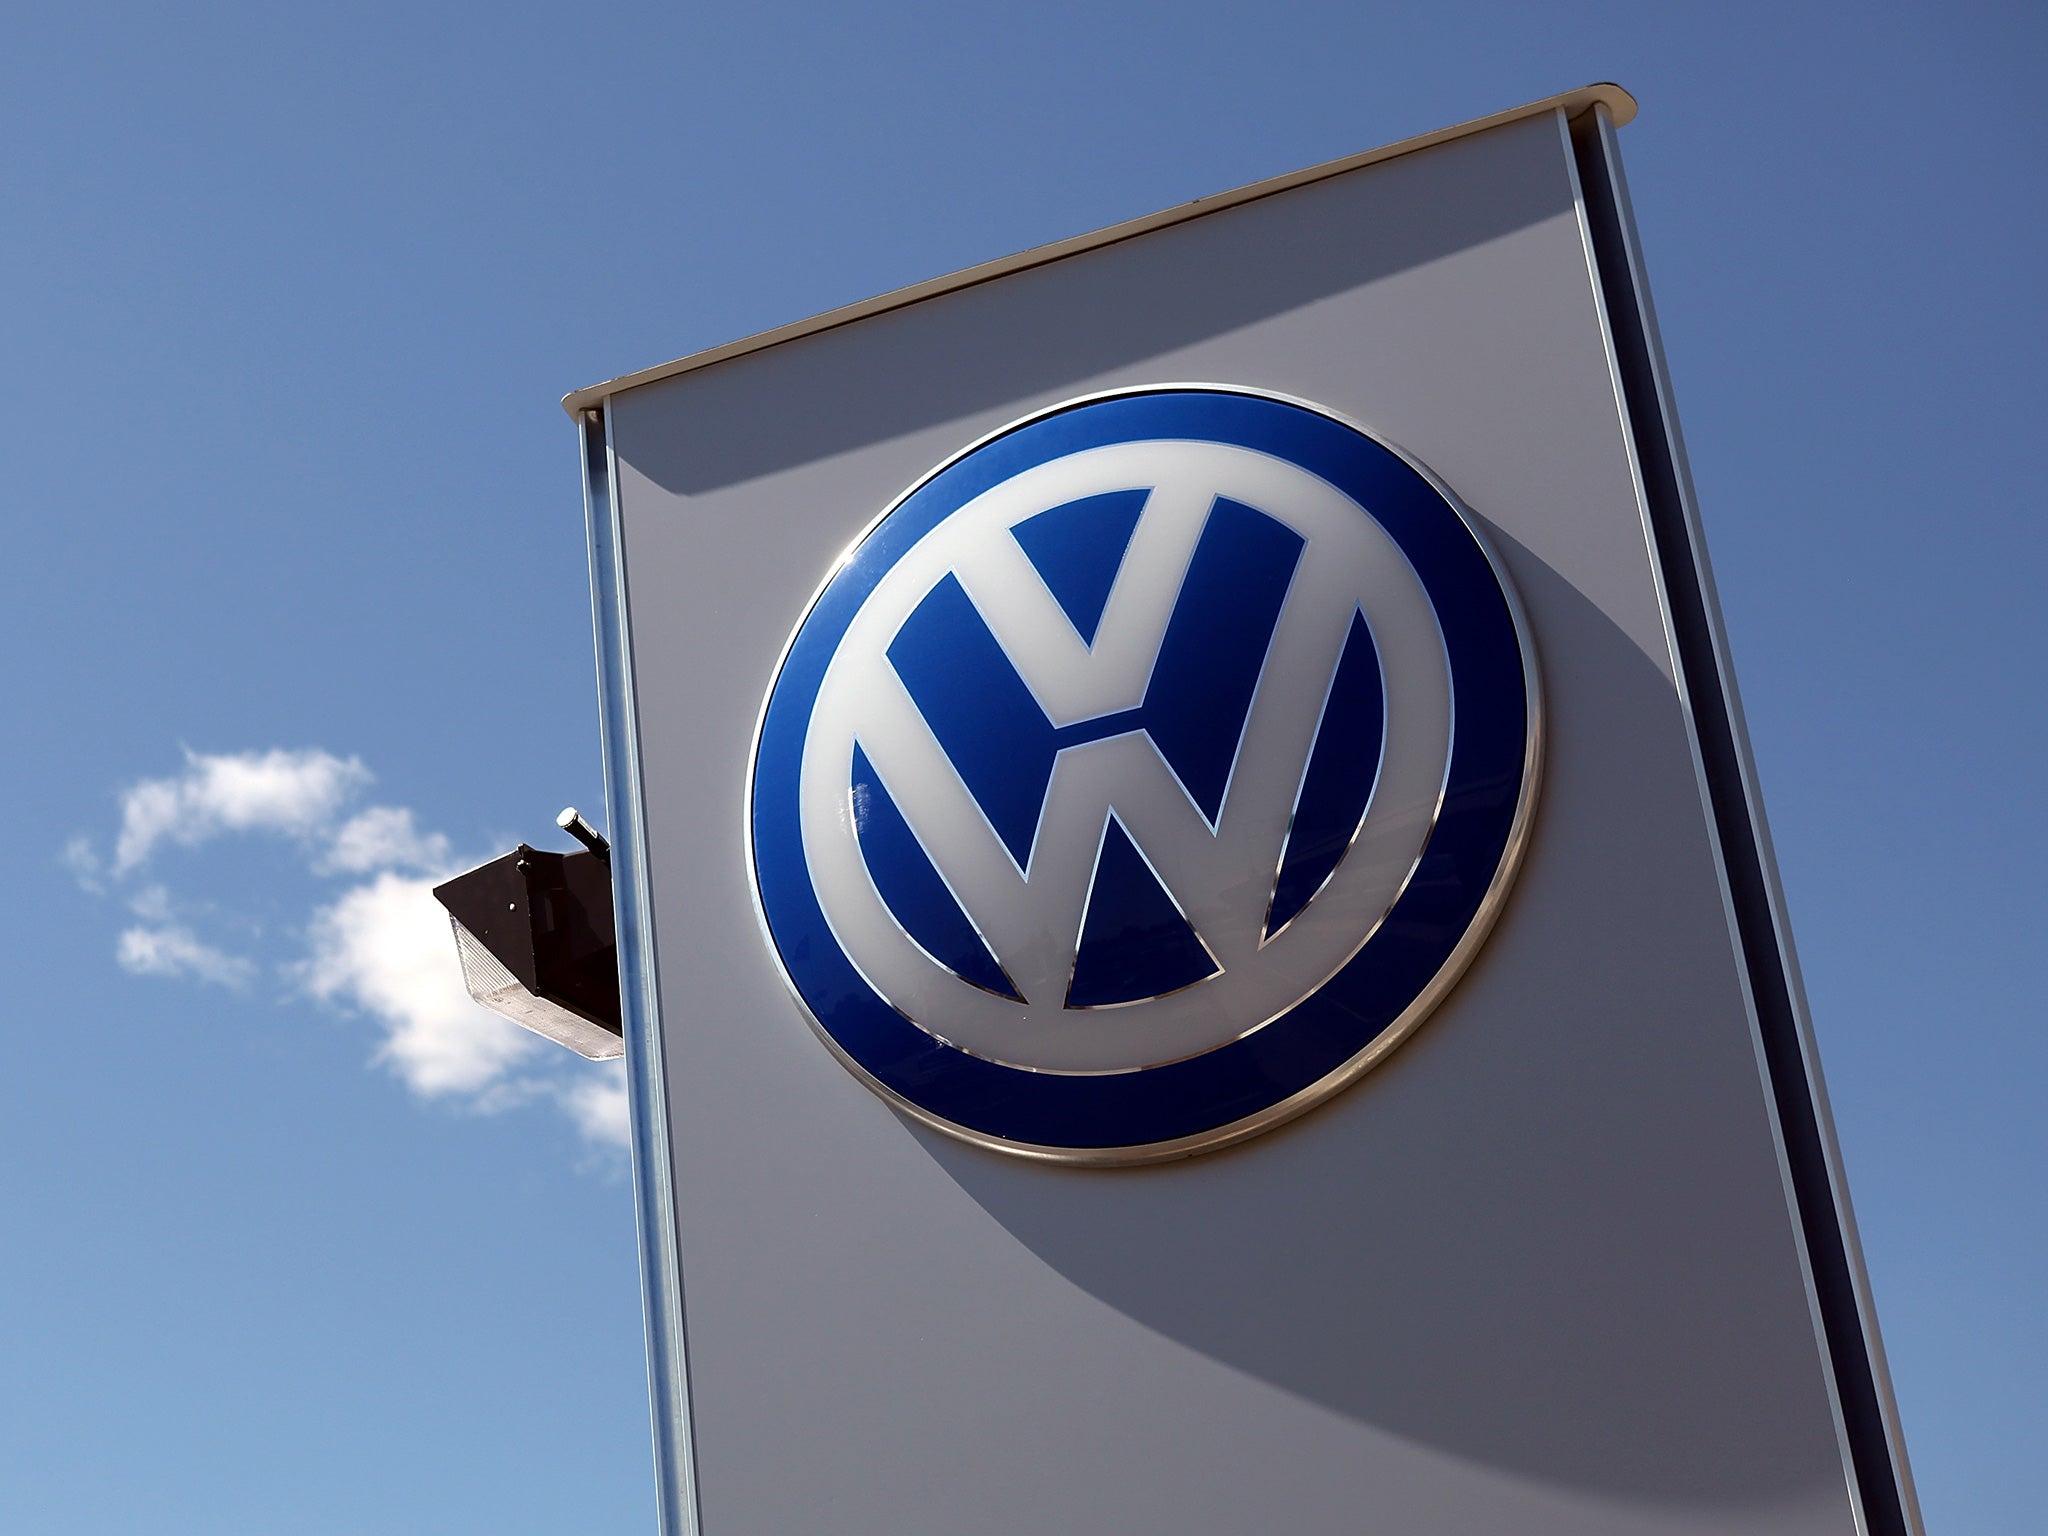 The raid comes almost three weeks after Volkswagen confessed to rigging its emissions tests